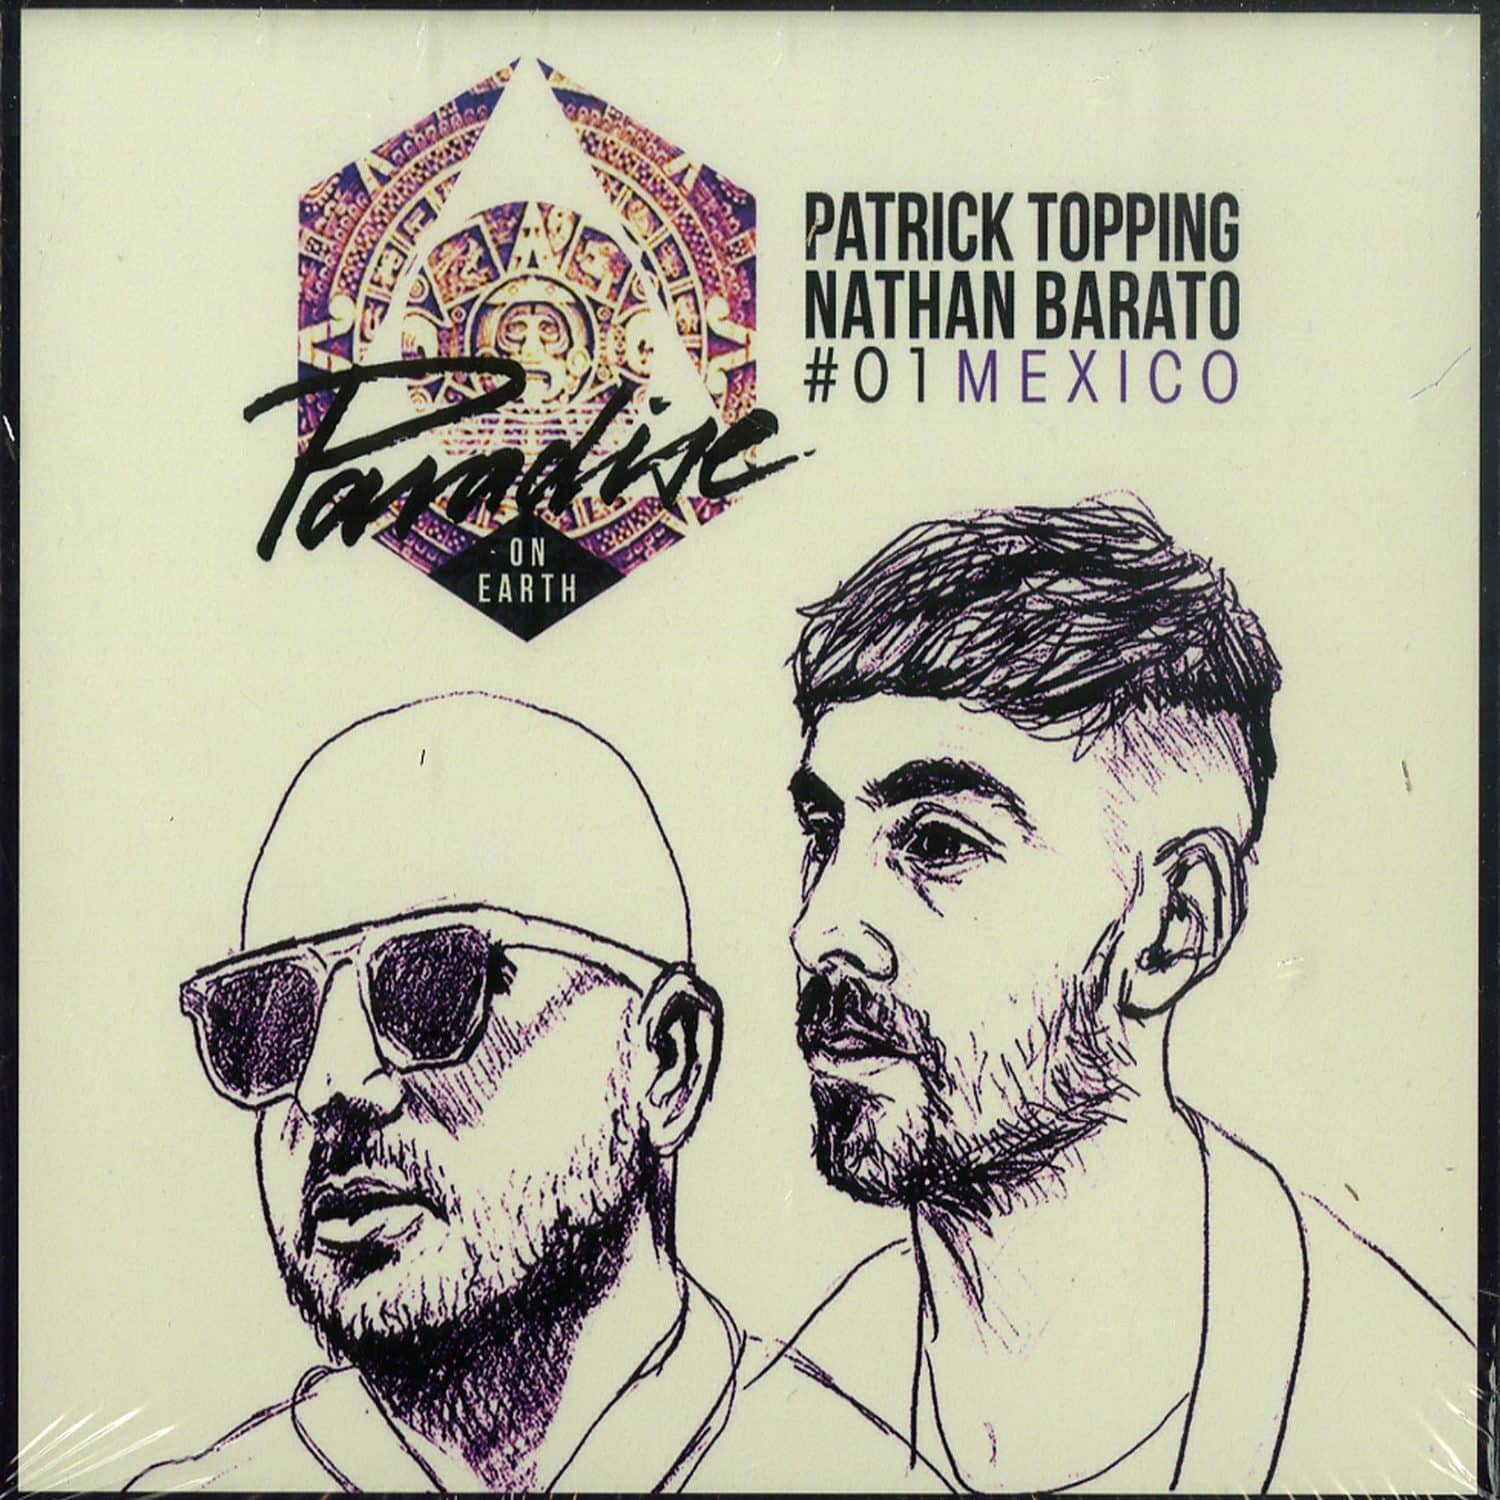 Patrick Topping & Nathan Barato - PARADISE ON EARTH - 01 MEXICO 